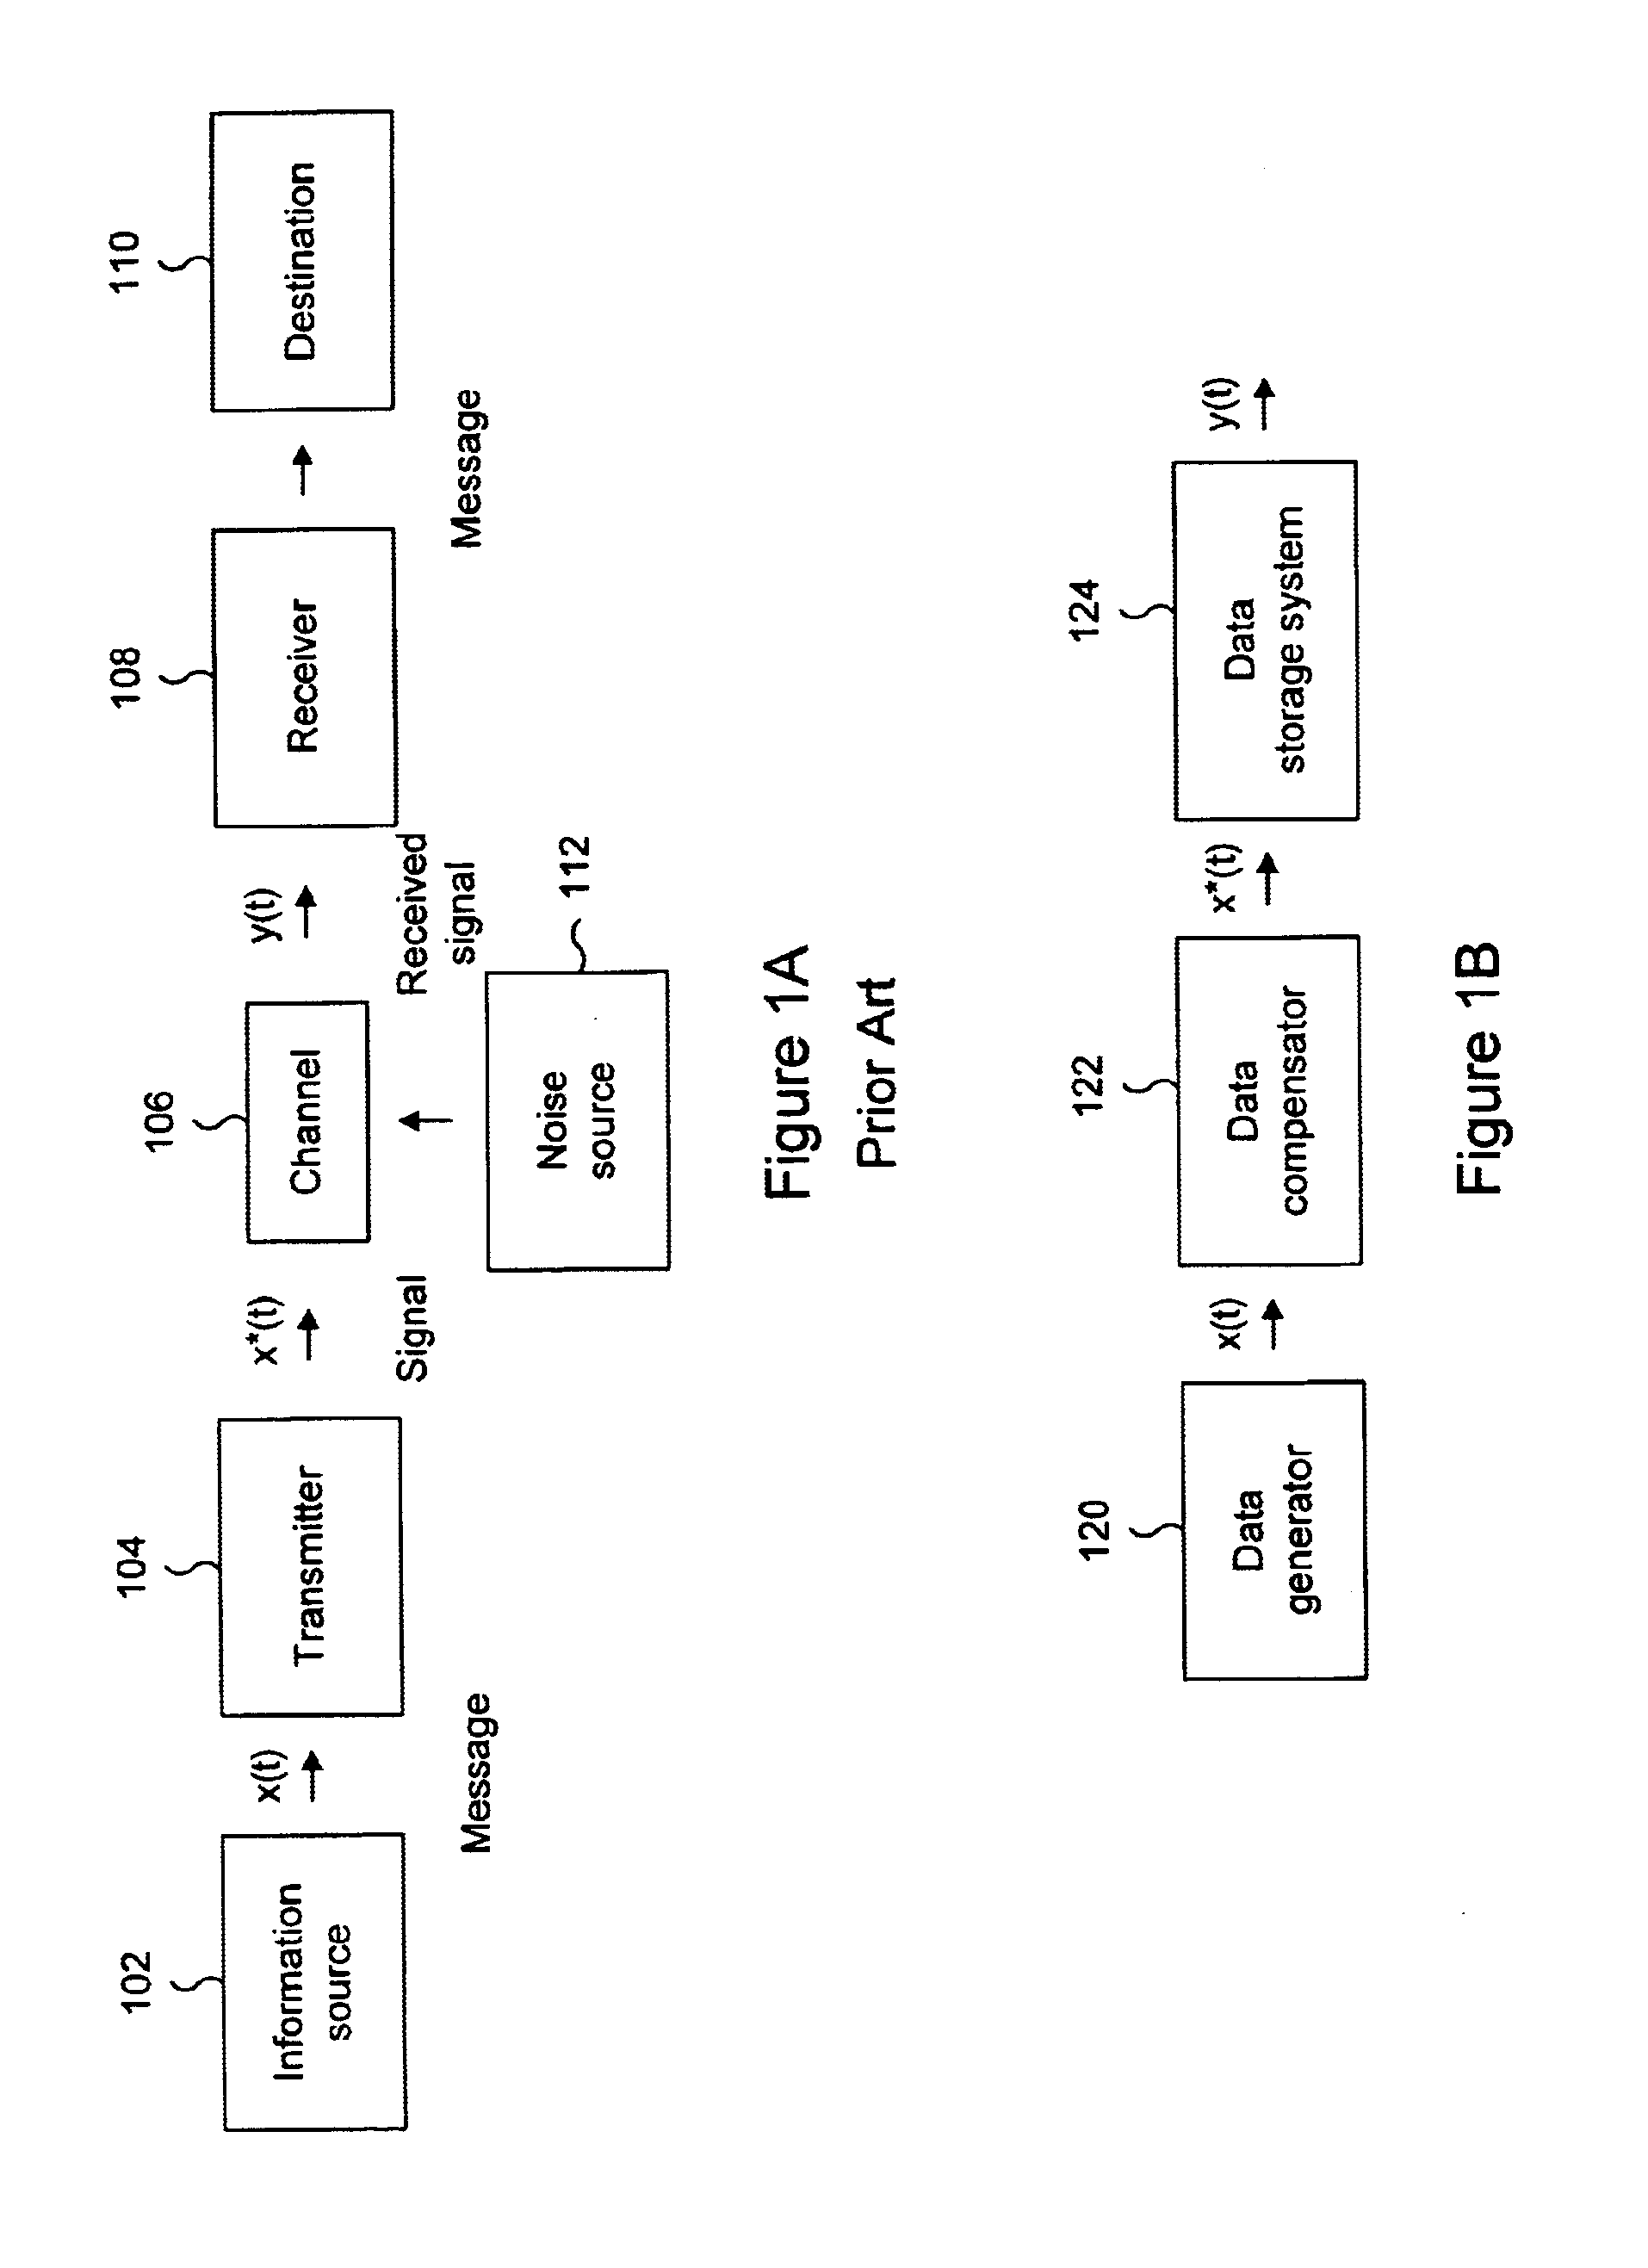 Write compensation for a multi-level data storage system